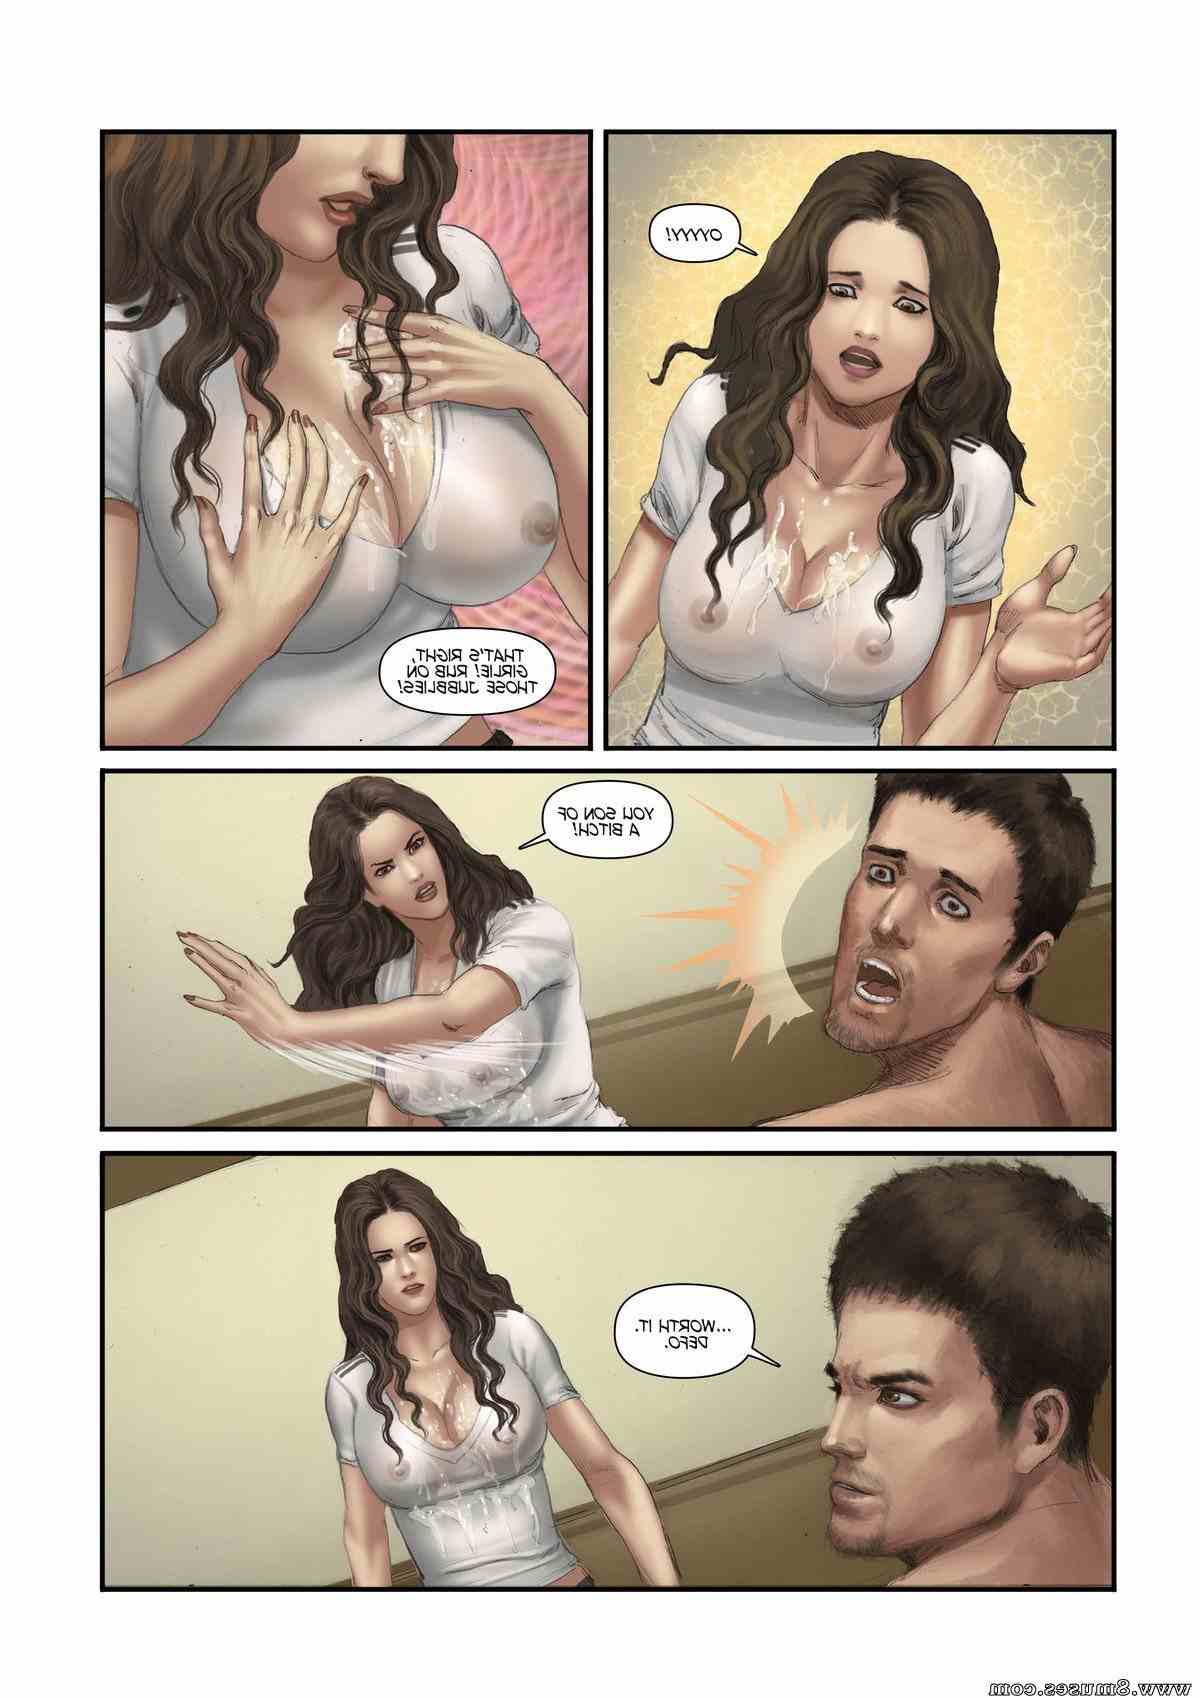 Expansionfan-Comics/The-BEautiful-Game The_BEautiful_Game__8muses_-_Sex_and_Porn_Comics_8.jpg